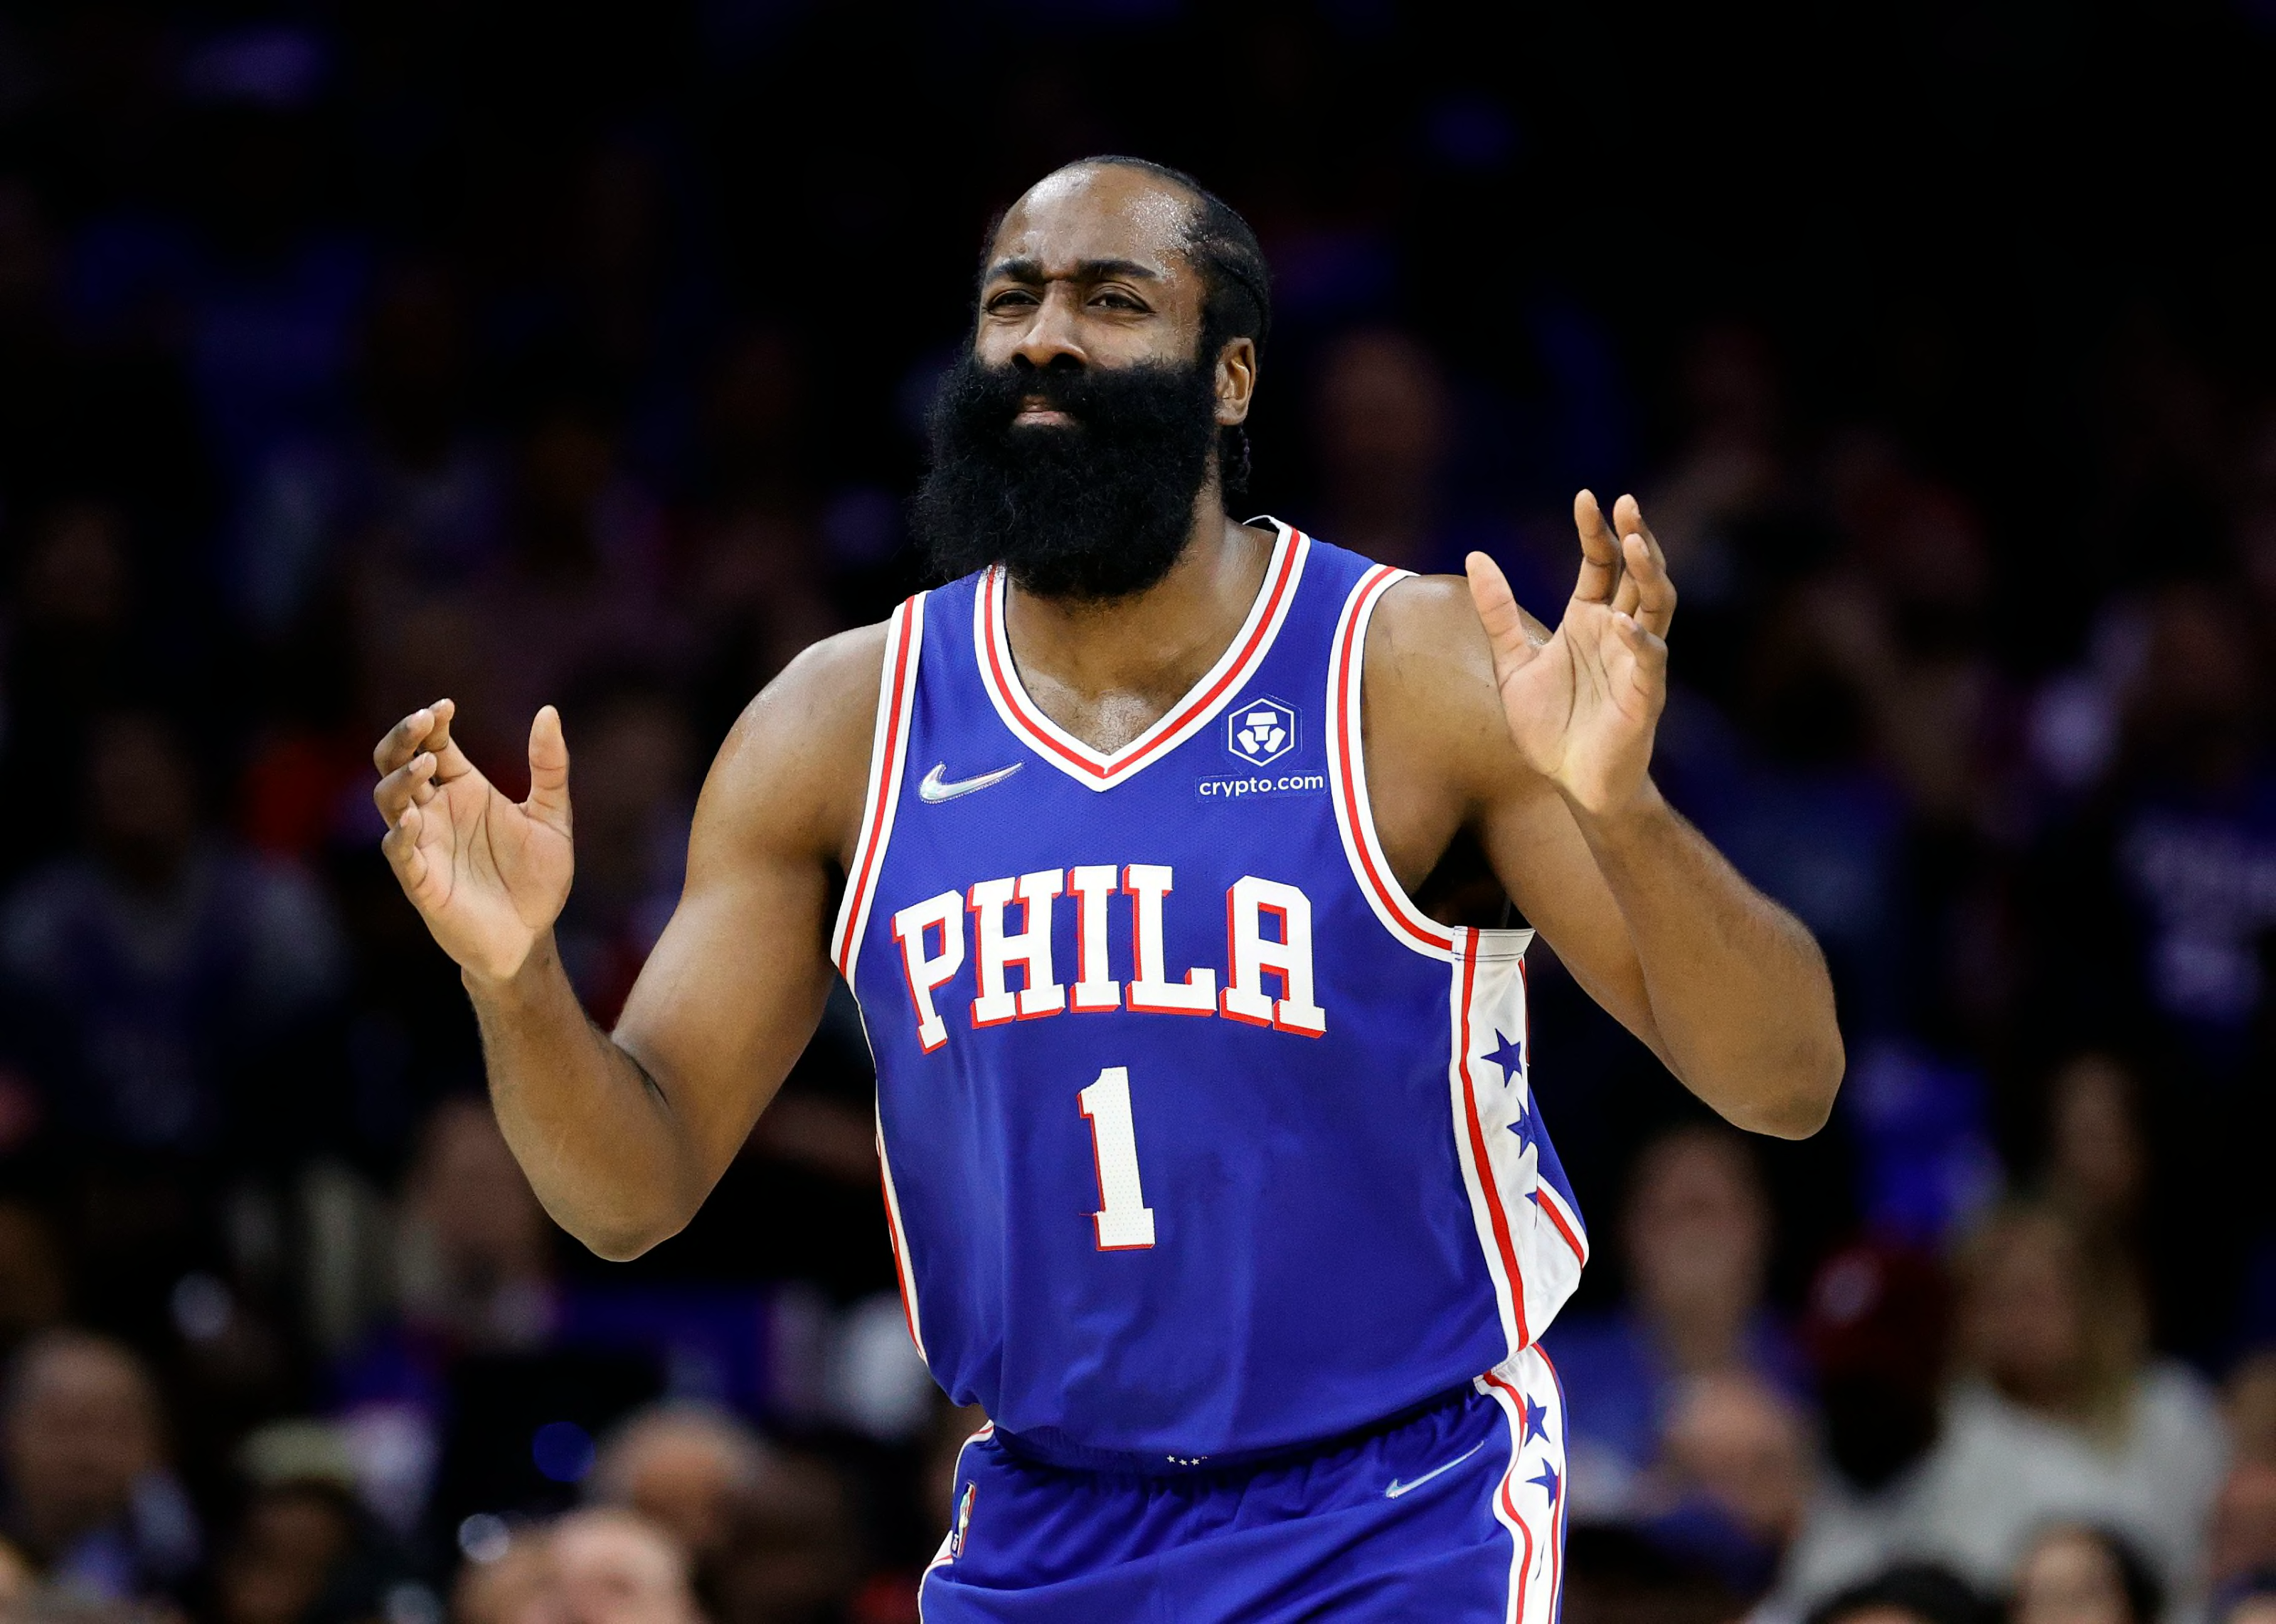 James Harden all smiles as he excels in Philadelphia 76ers debut